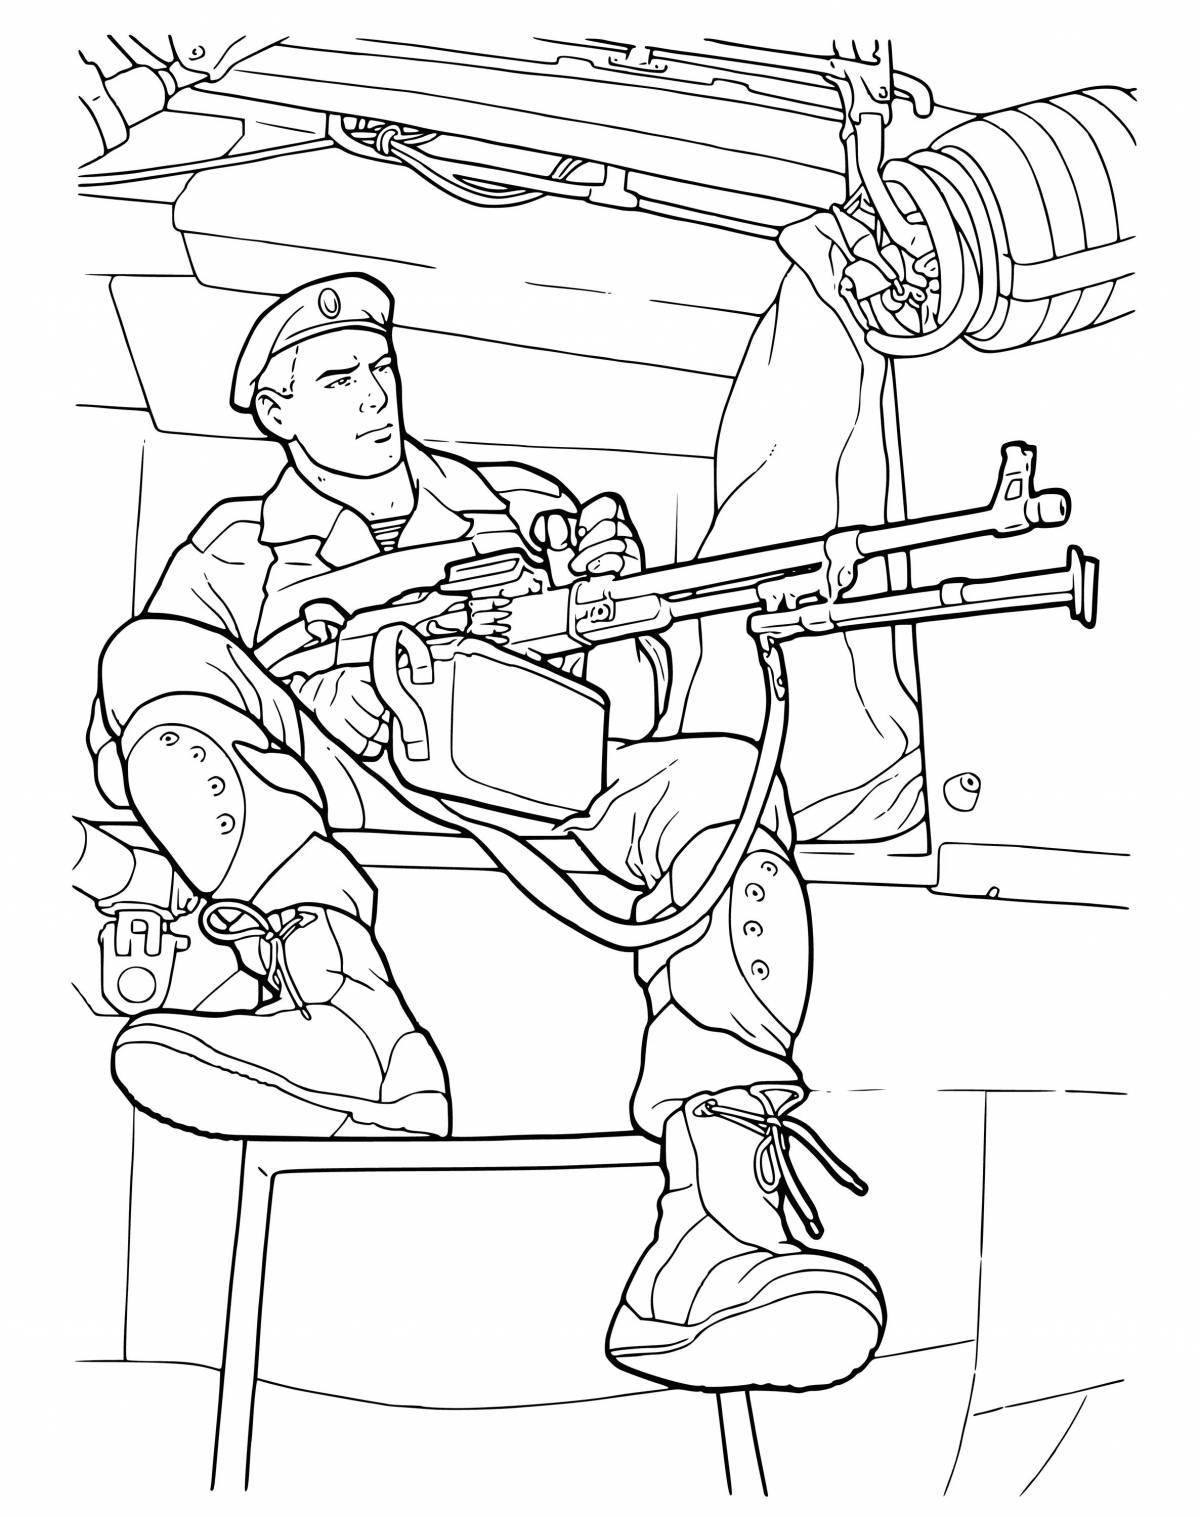 Inspirational infantry coloring for students